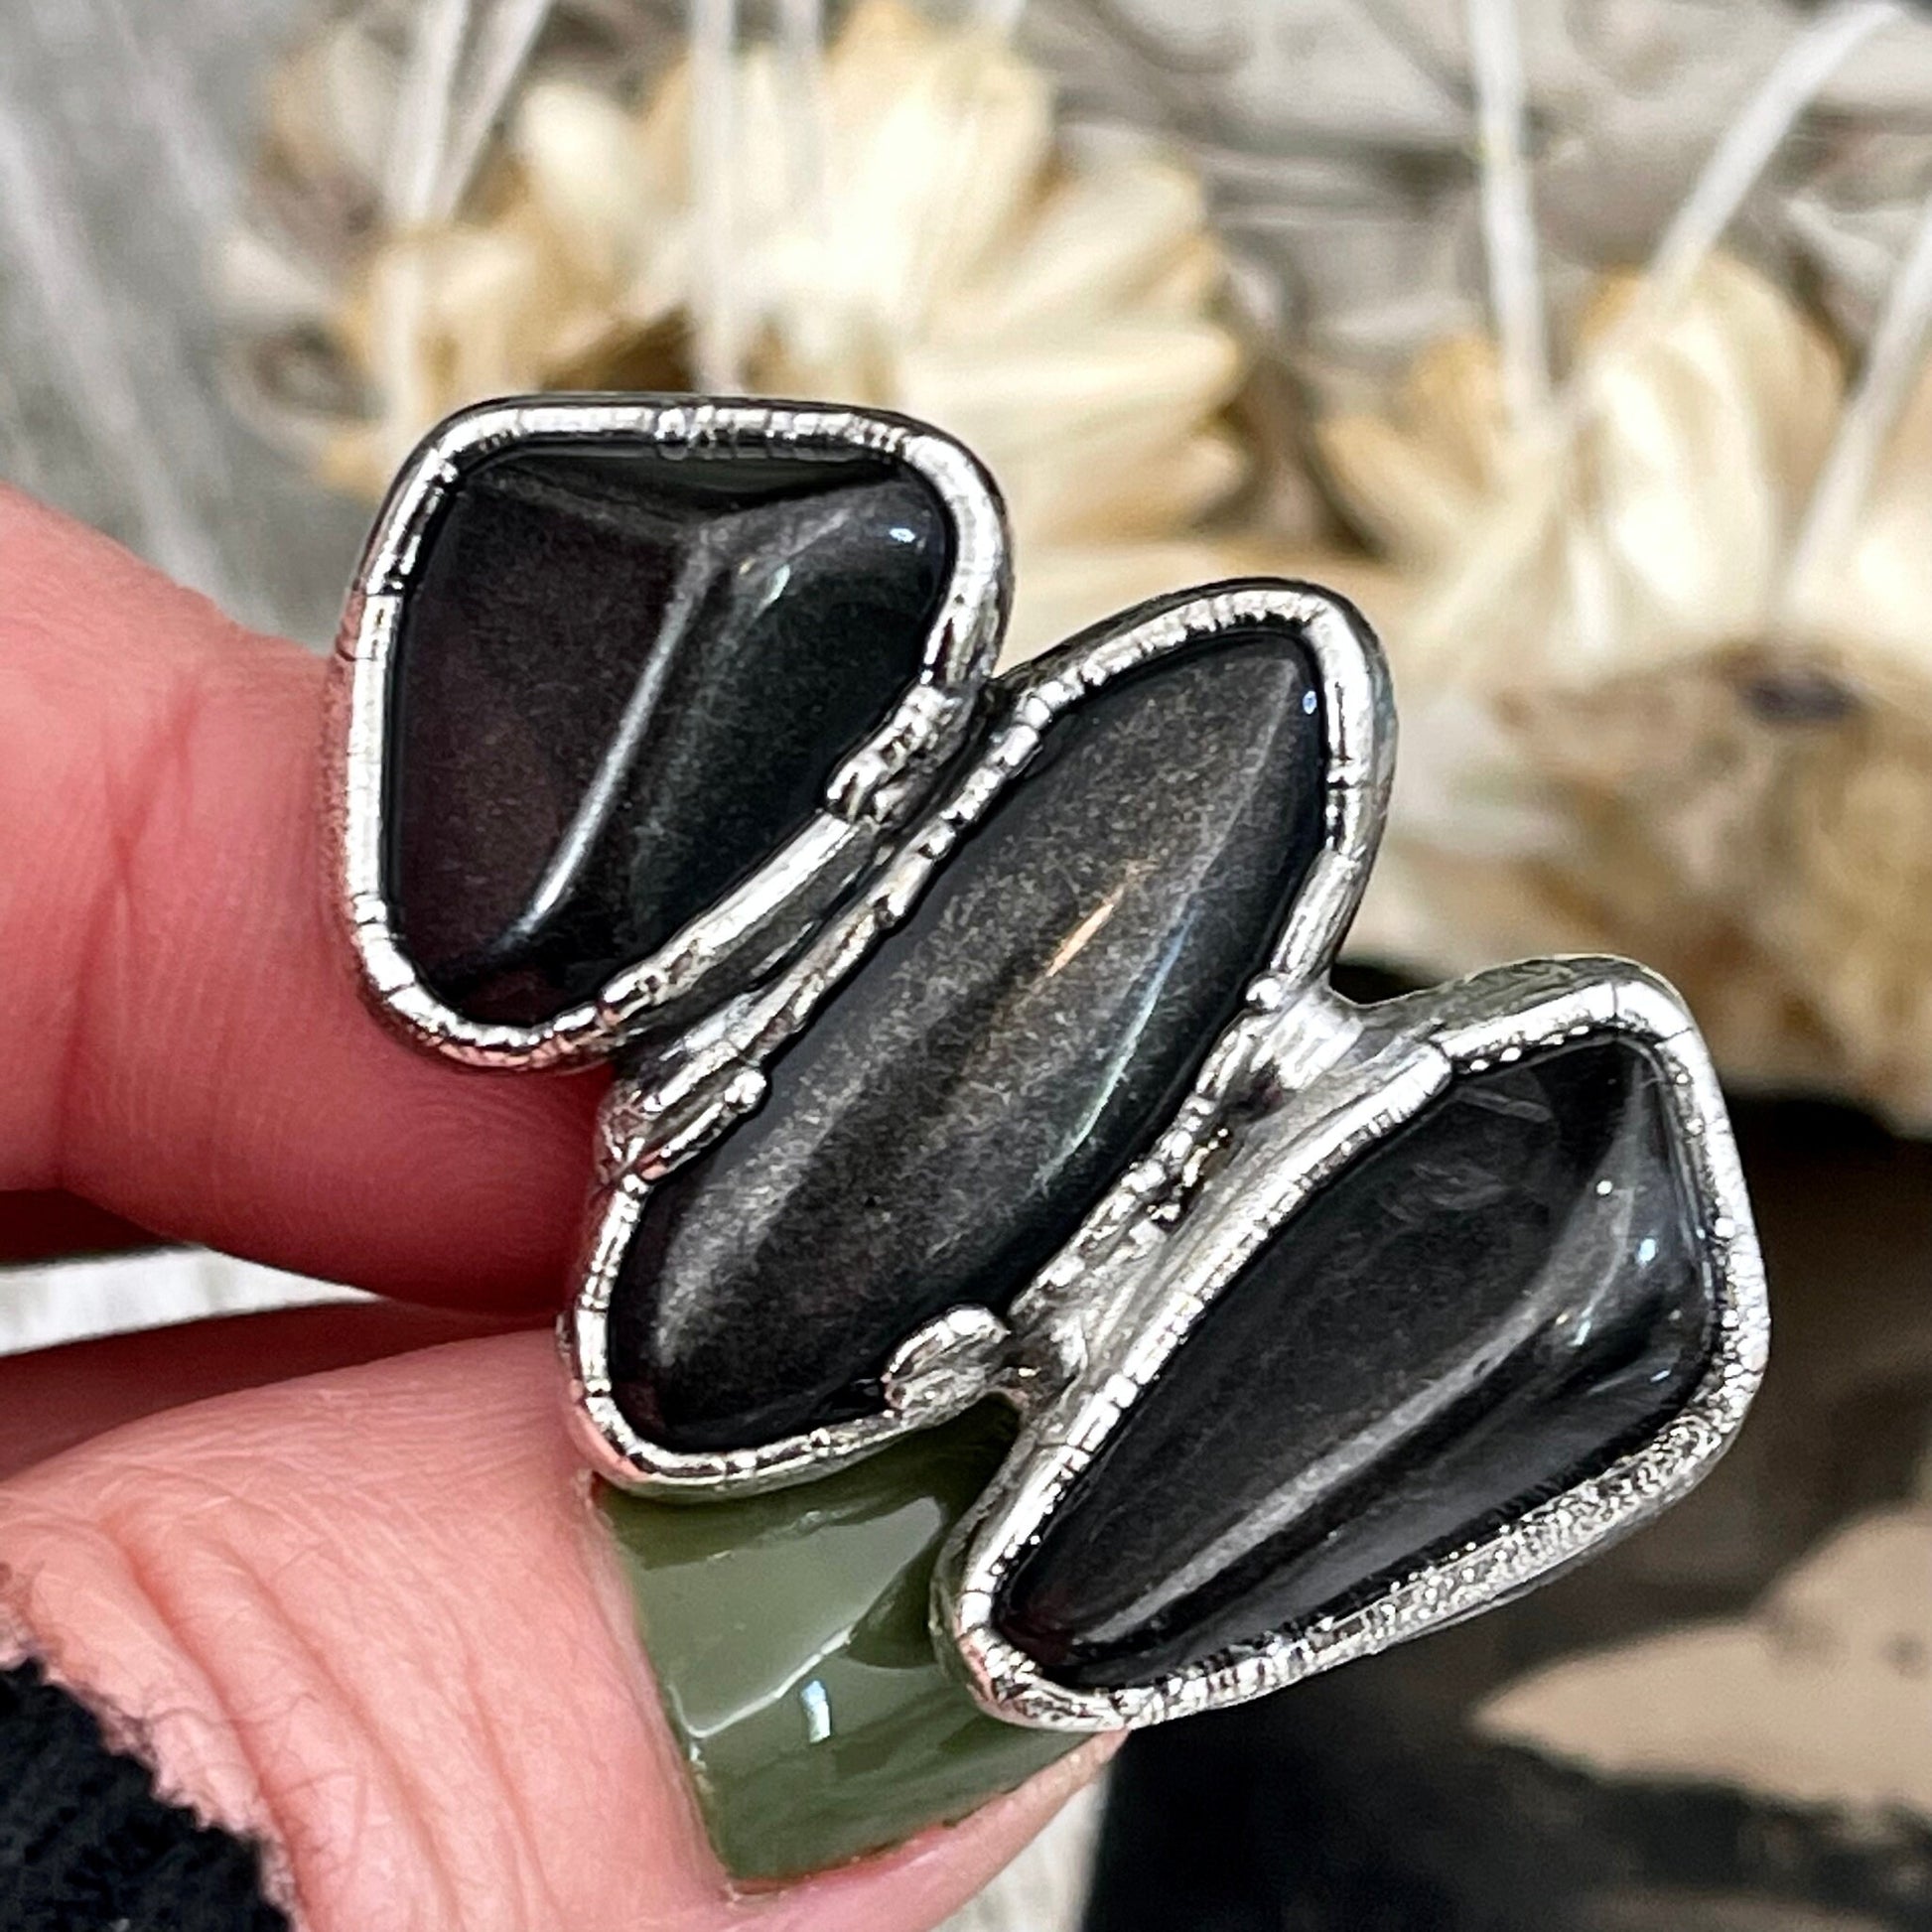 Size 8 Crystal Ring - Three Stone Ring Black Onyx Ring in Silver / Foxlark Collection - One of a Kind / Witchy Big Crystal Jewelry Goth Ring